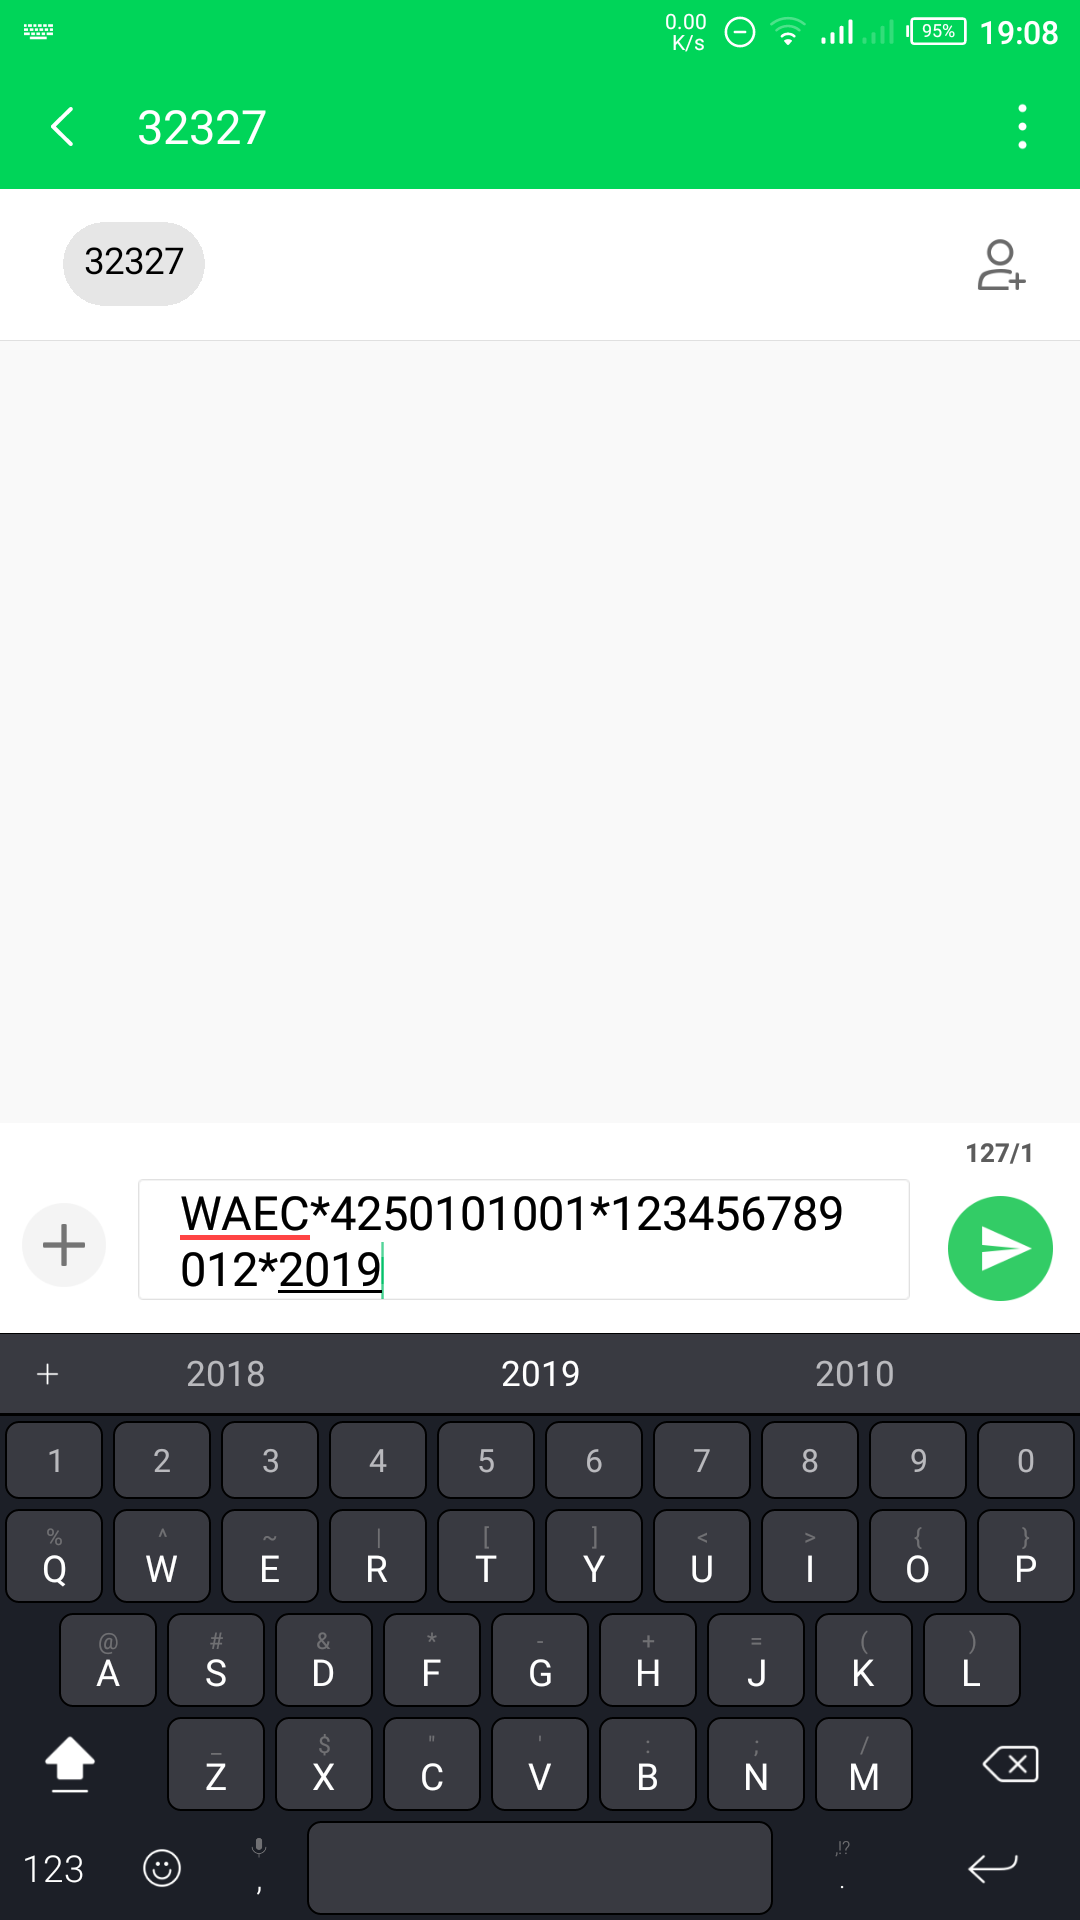 How to check WAEC result on phone